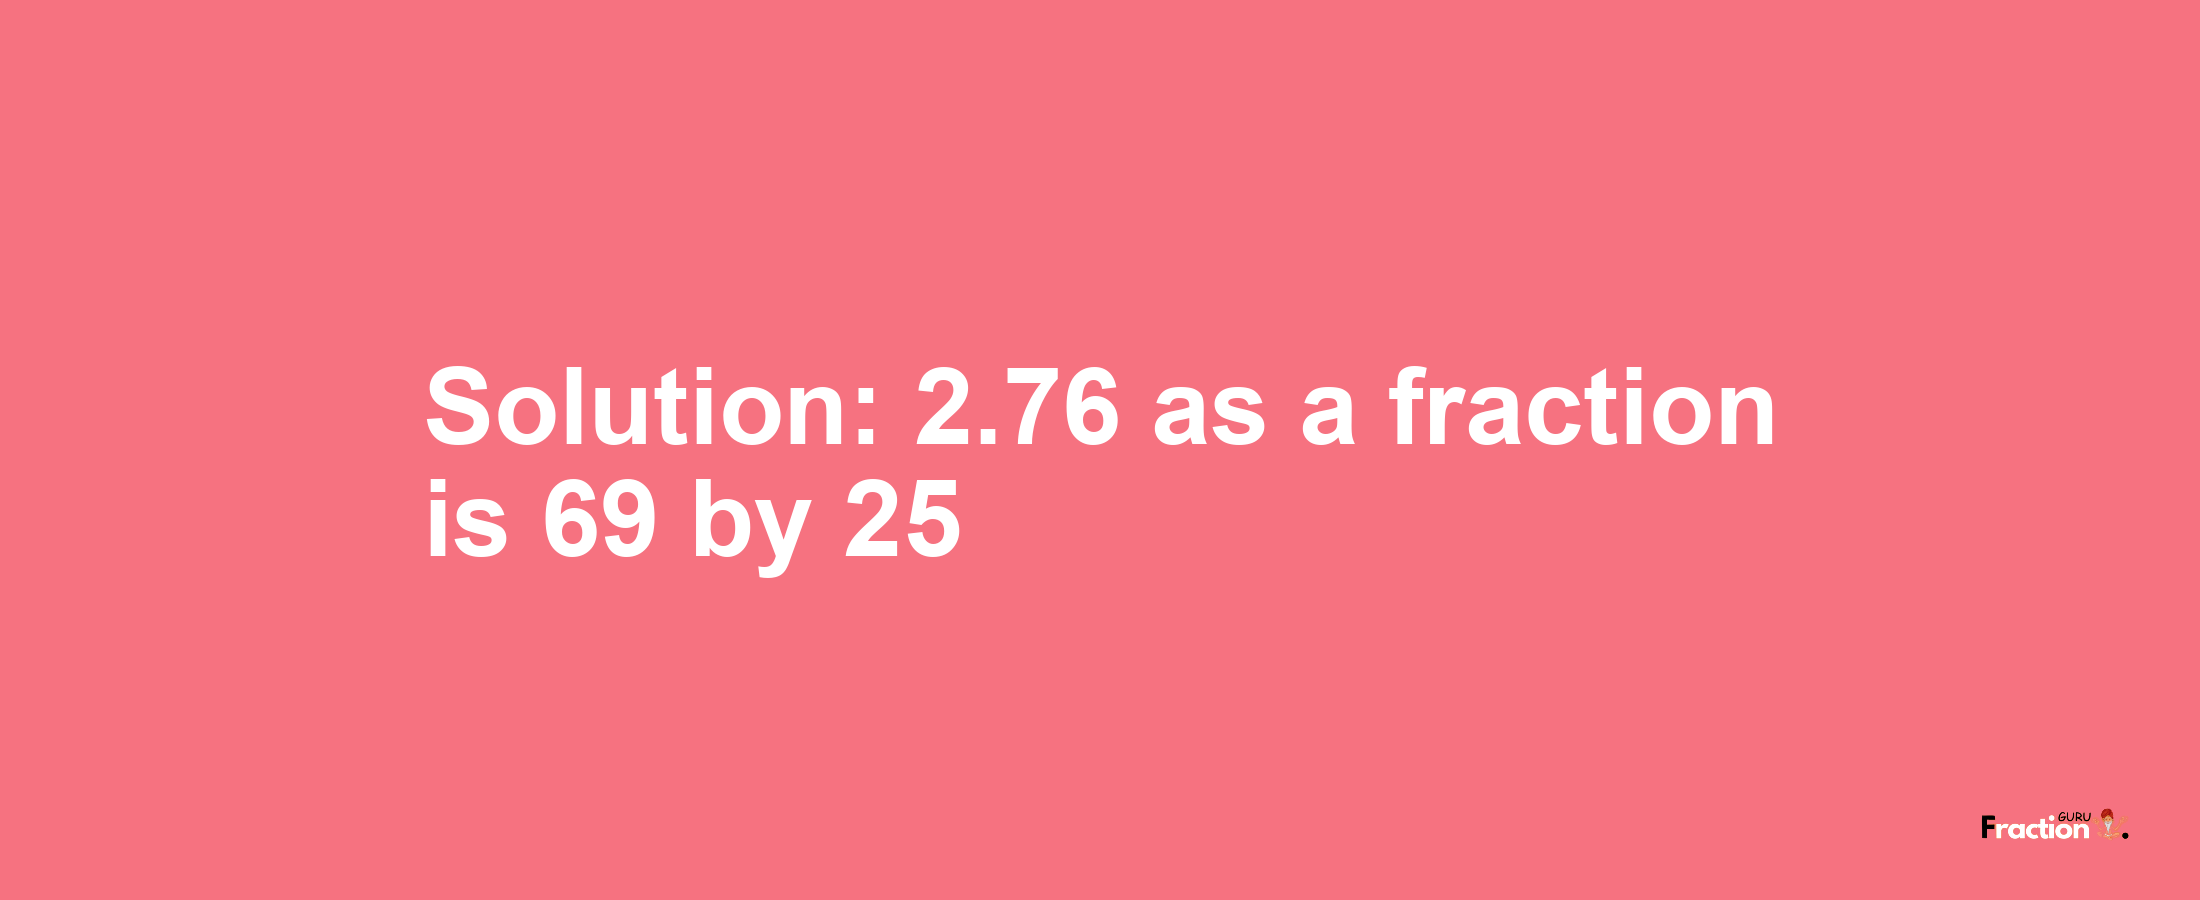 Solution:2.76 as a fraction is 69/25